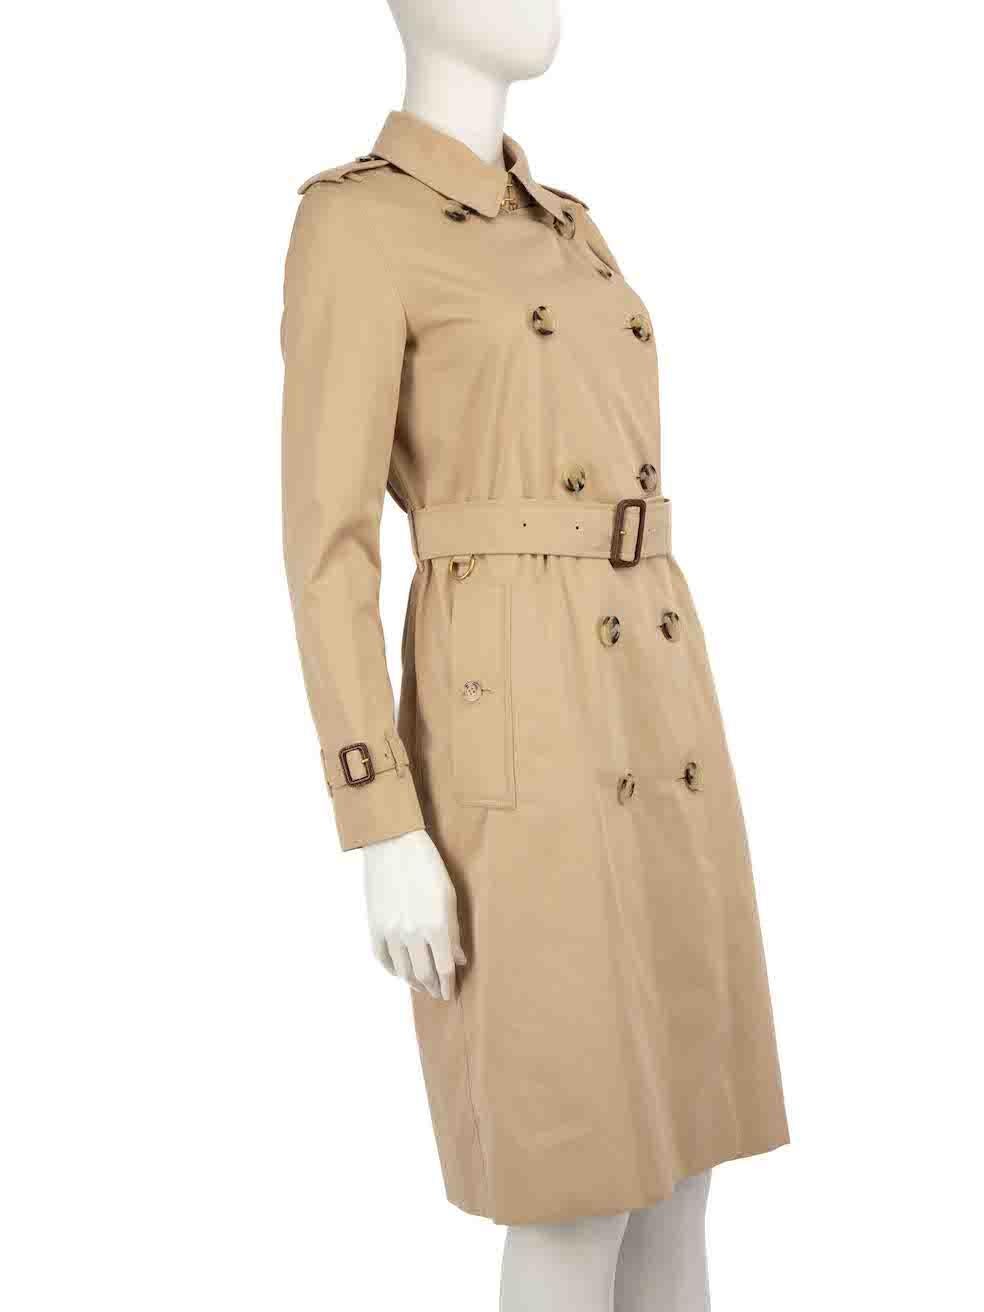 CONDITION is Very good. Minimal wear to coat is evident. Minimal discolouration to the collar, front bottom left side, and back right sleeve on this used Burberry designer resale item.
 
 
 
 Details
 
 
 Model: The Kensington
 
 Beige
 
 Cotton
 
